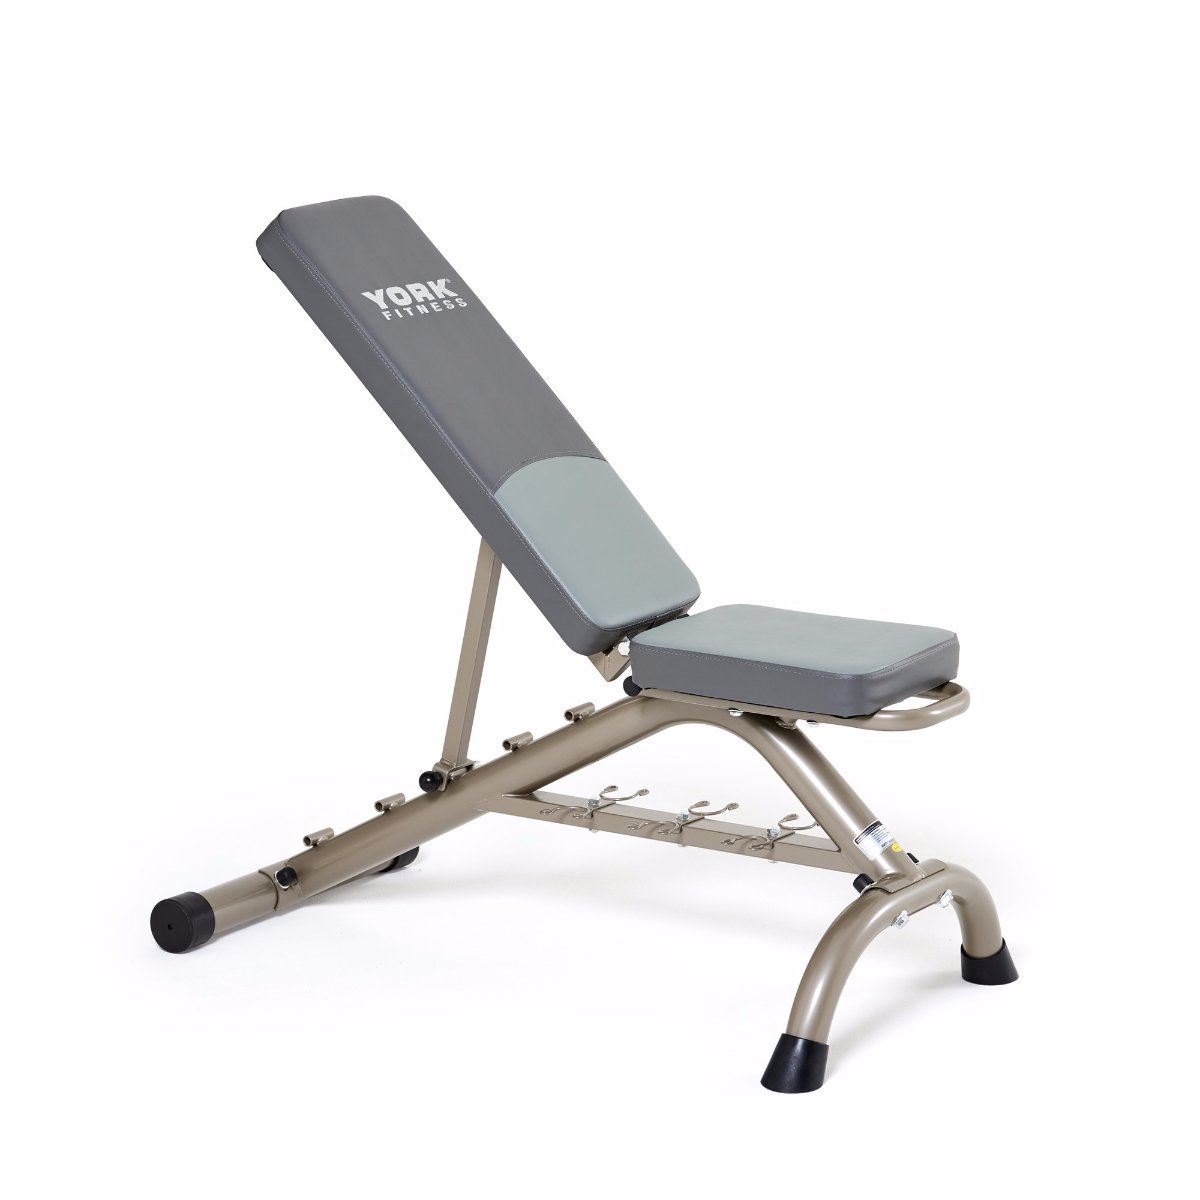 Adjustable Bench Press With Fitbell 